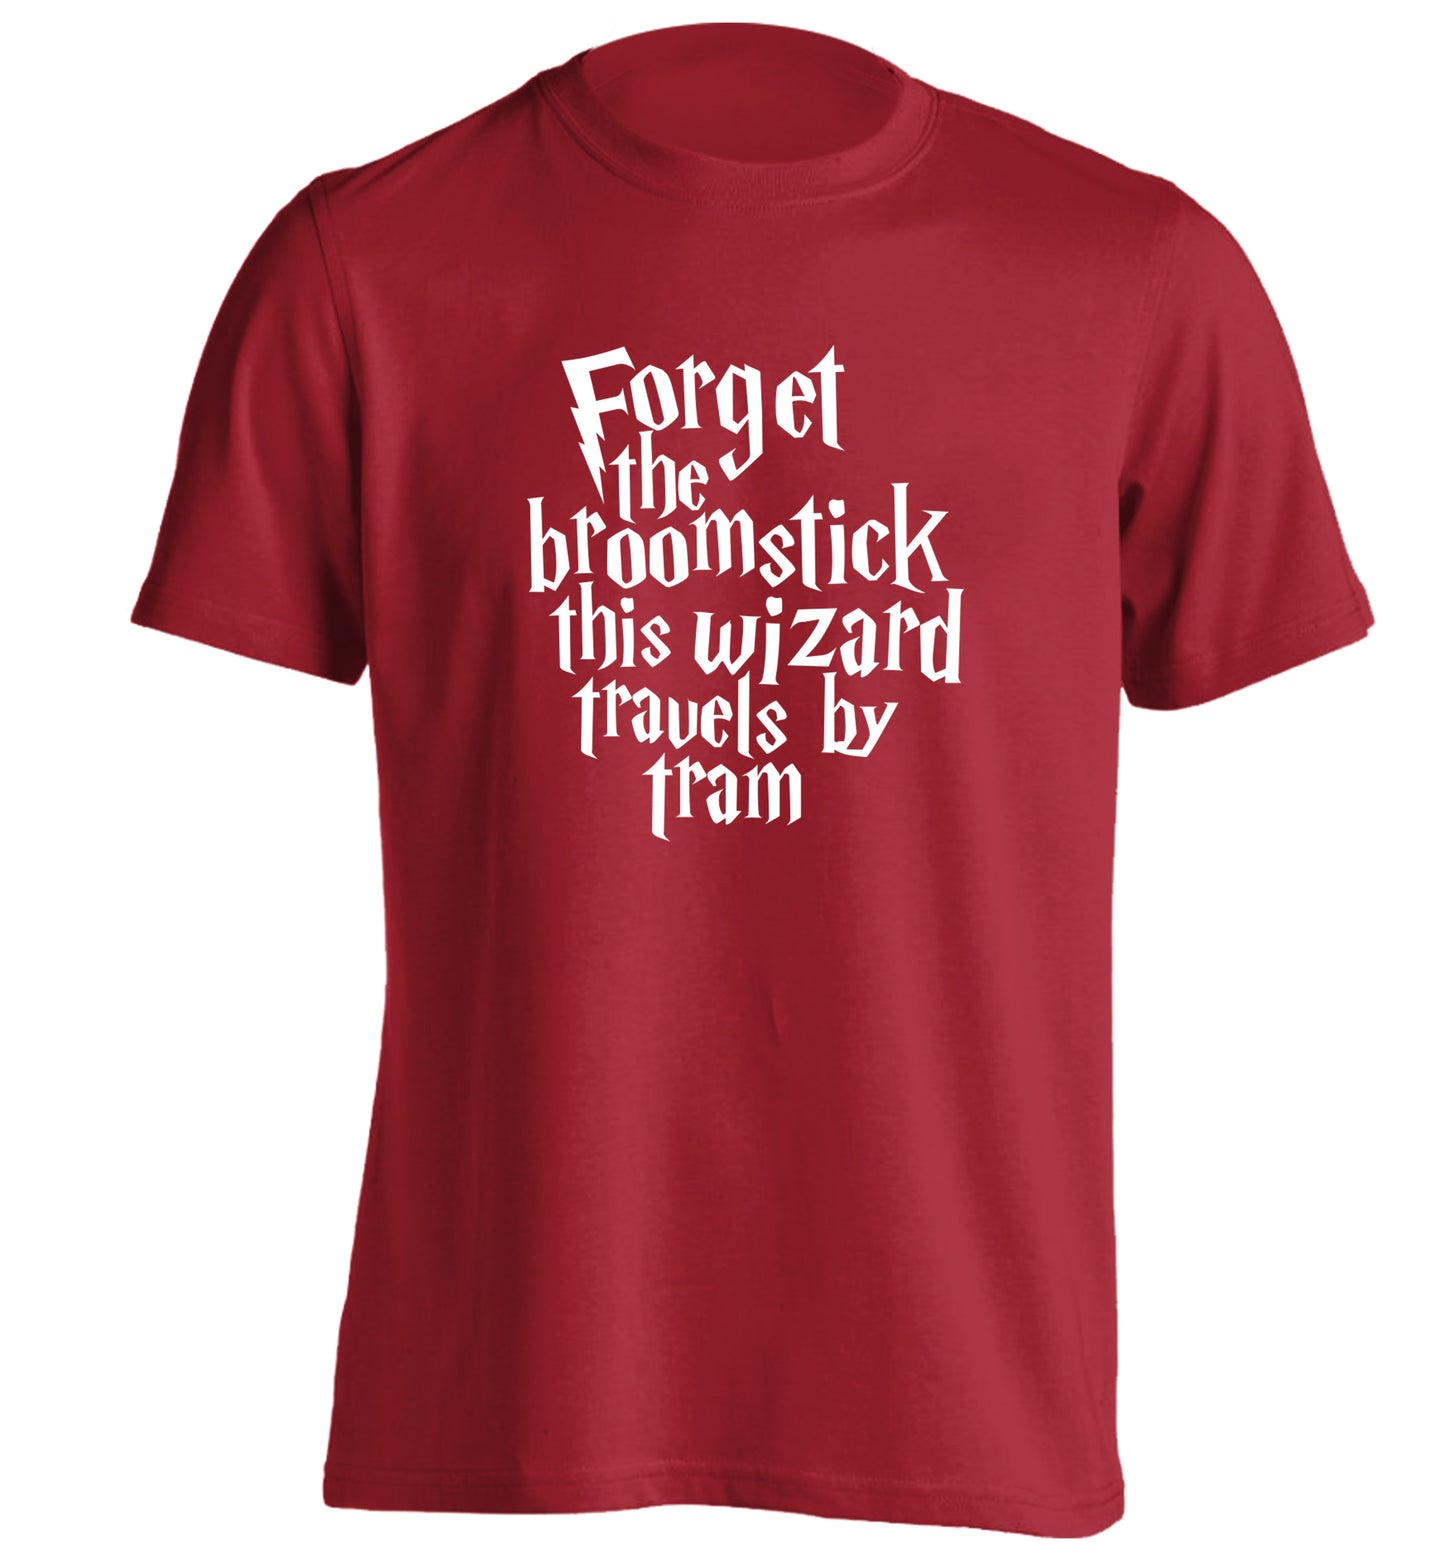 Forget the broomstick this wizard travels by tram adults unisexred Tshirt 2XL